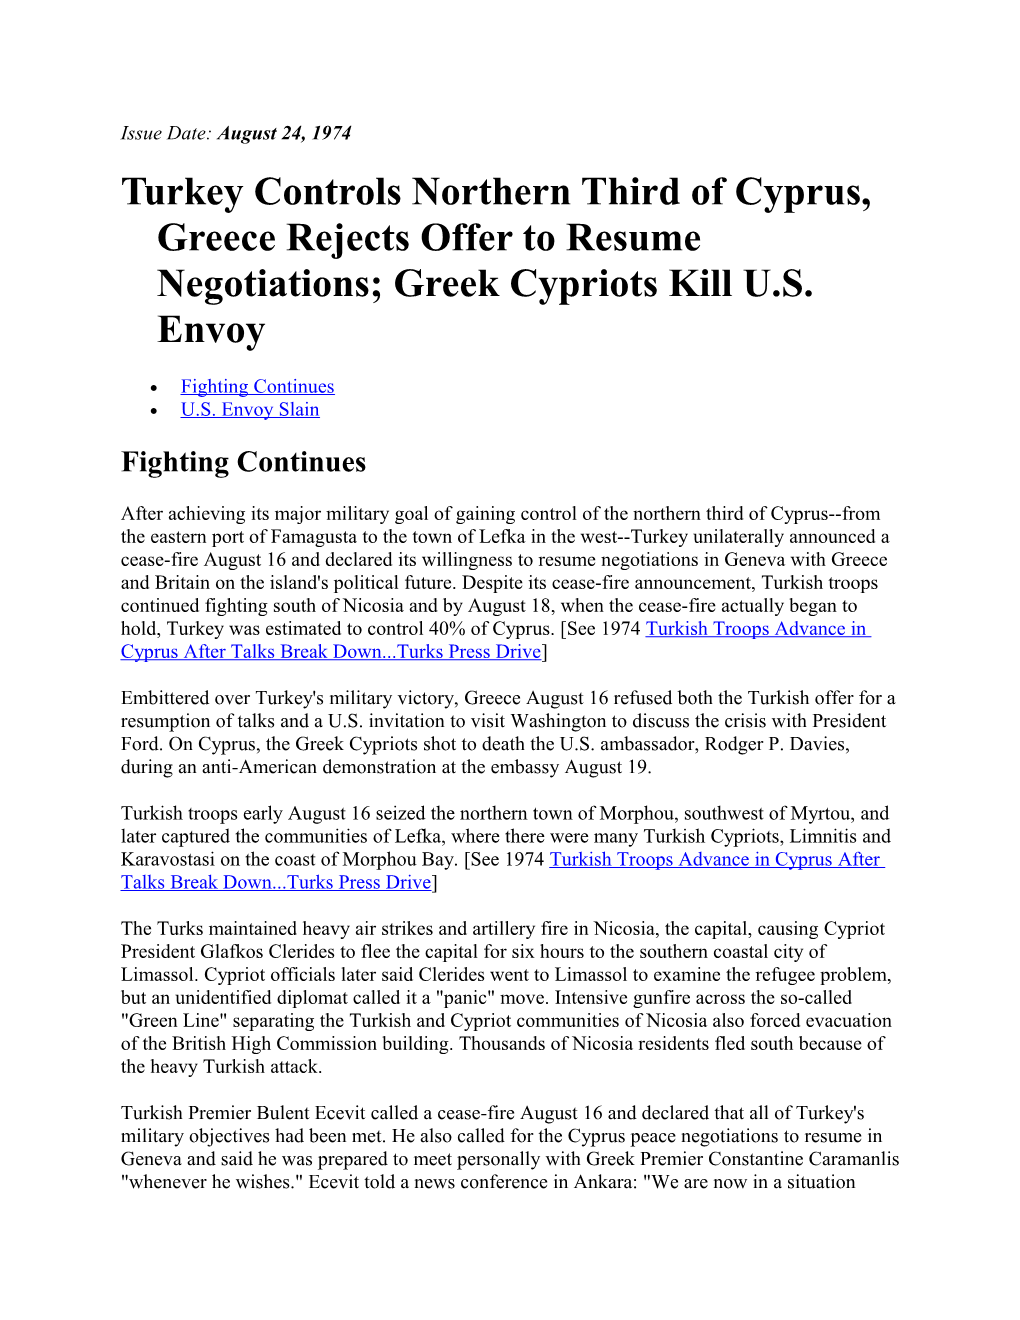 Turkey Controls Northern Third of Cyprus, Greece Rejects Offer to Resume Negotiations;